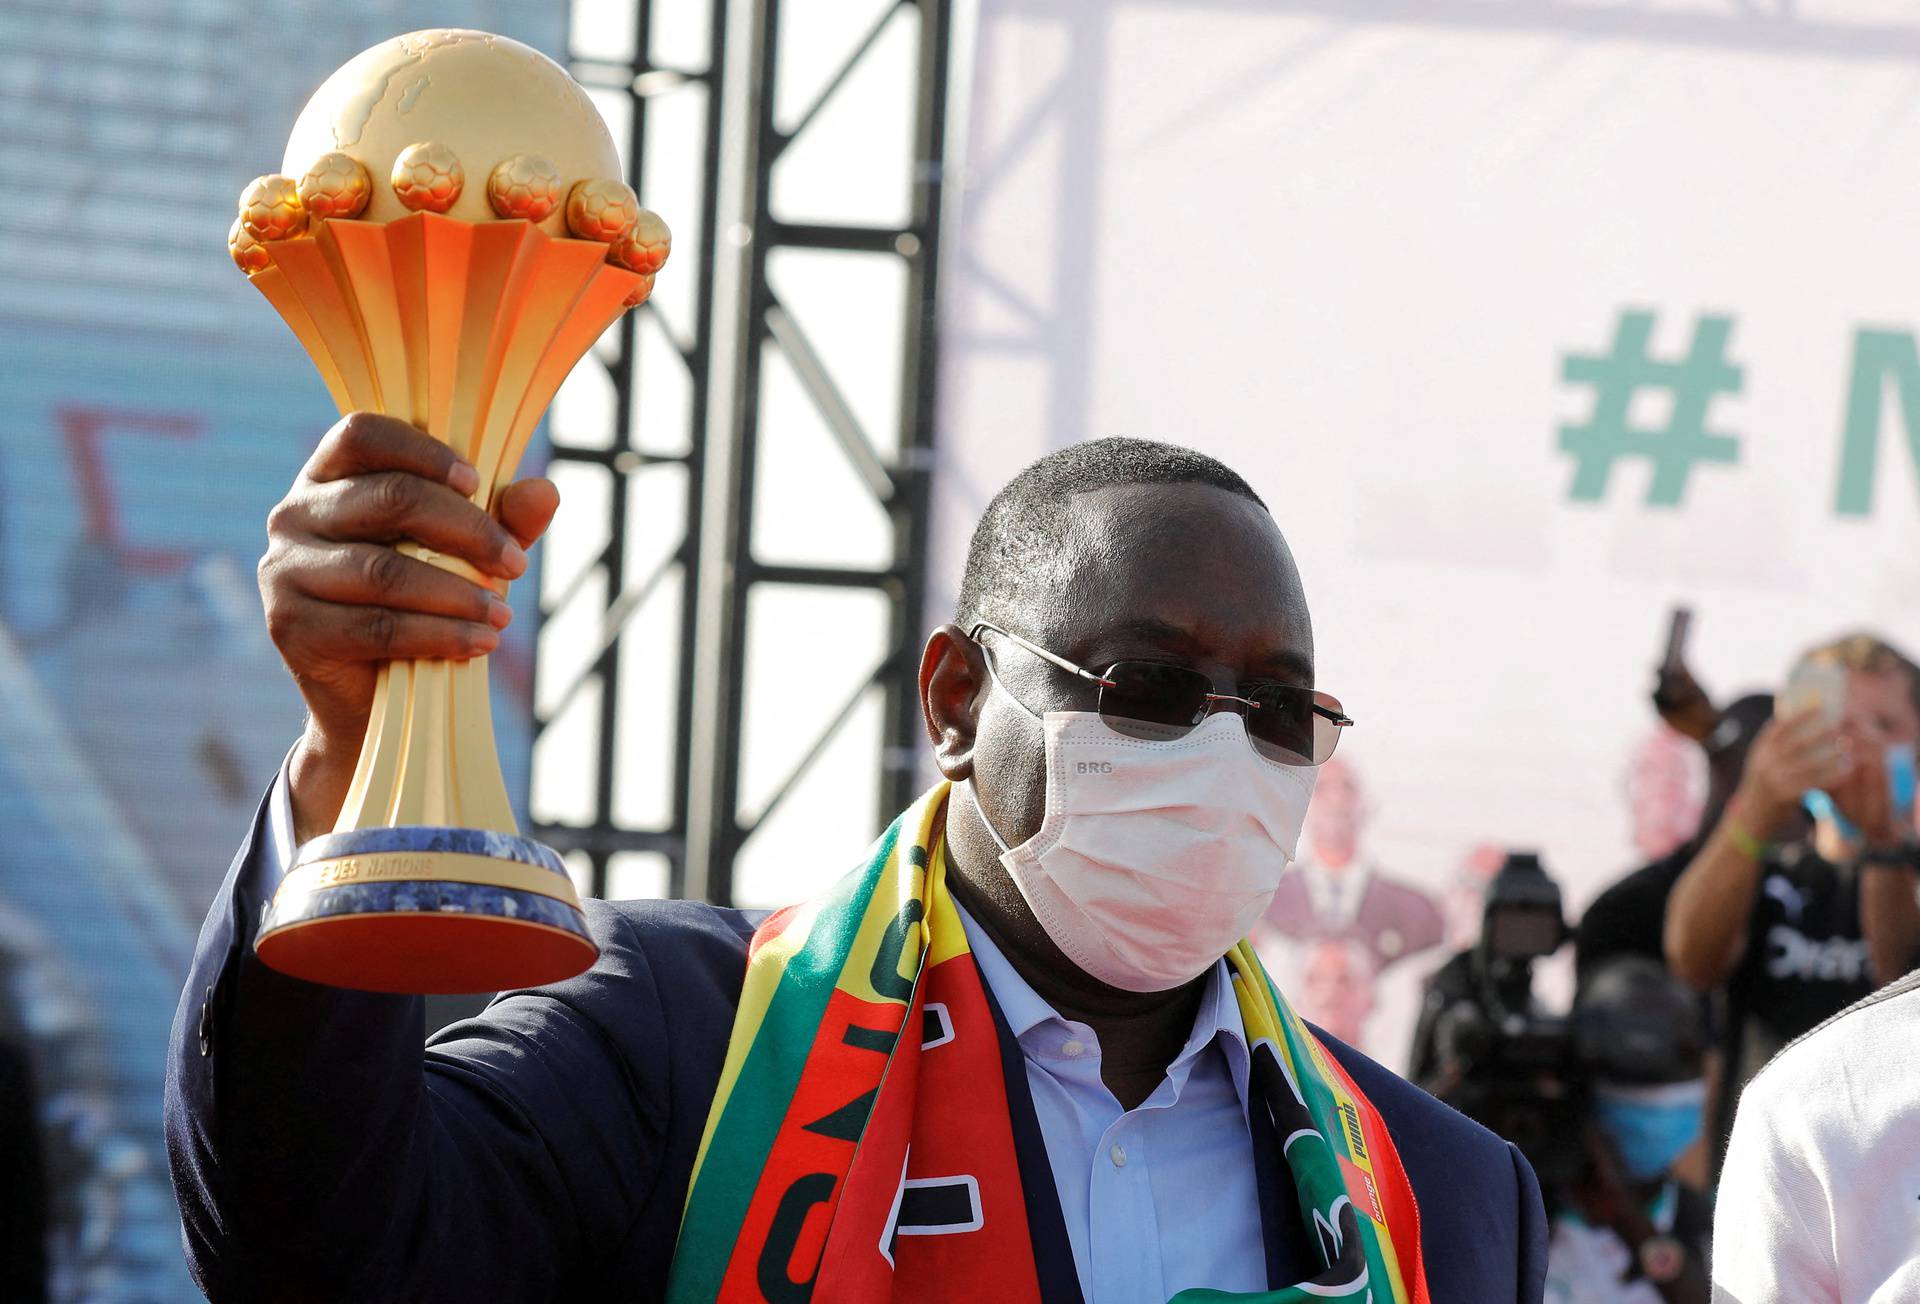 Senegal's President Macky Sall holds the trophy as he welcomes the Senegal National Soccer Team after their Africa Cup win, in Dakar